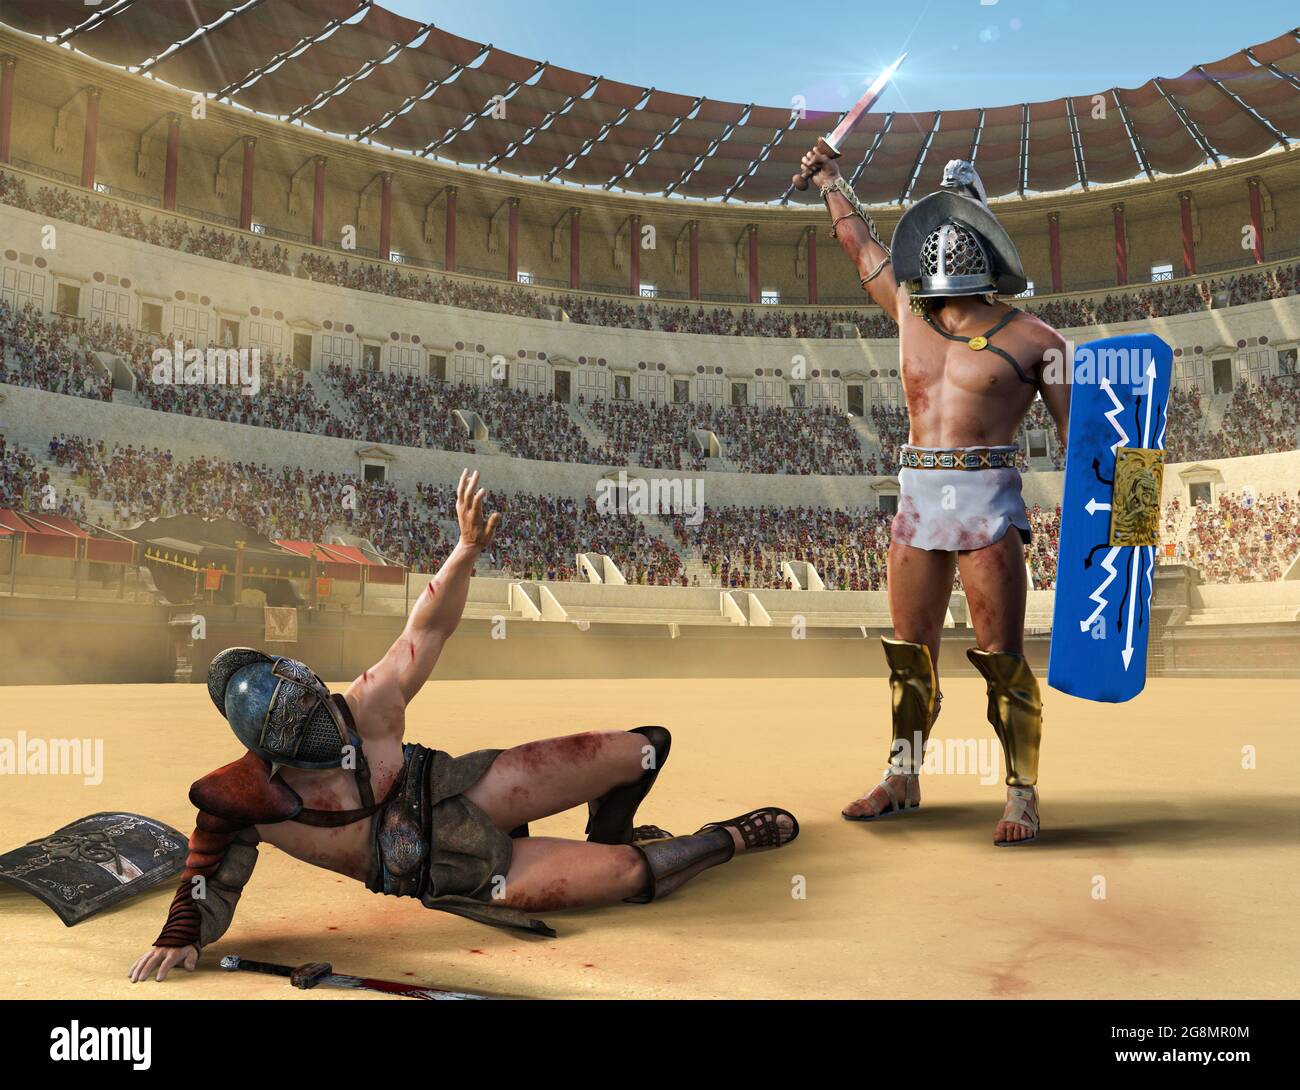 Gladiator fight in an ancient Roman colosseum. One gladiator on the ground begging for mercy, the other is victorious, 3d render. Stock Photo